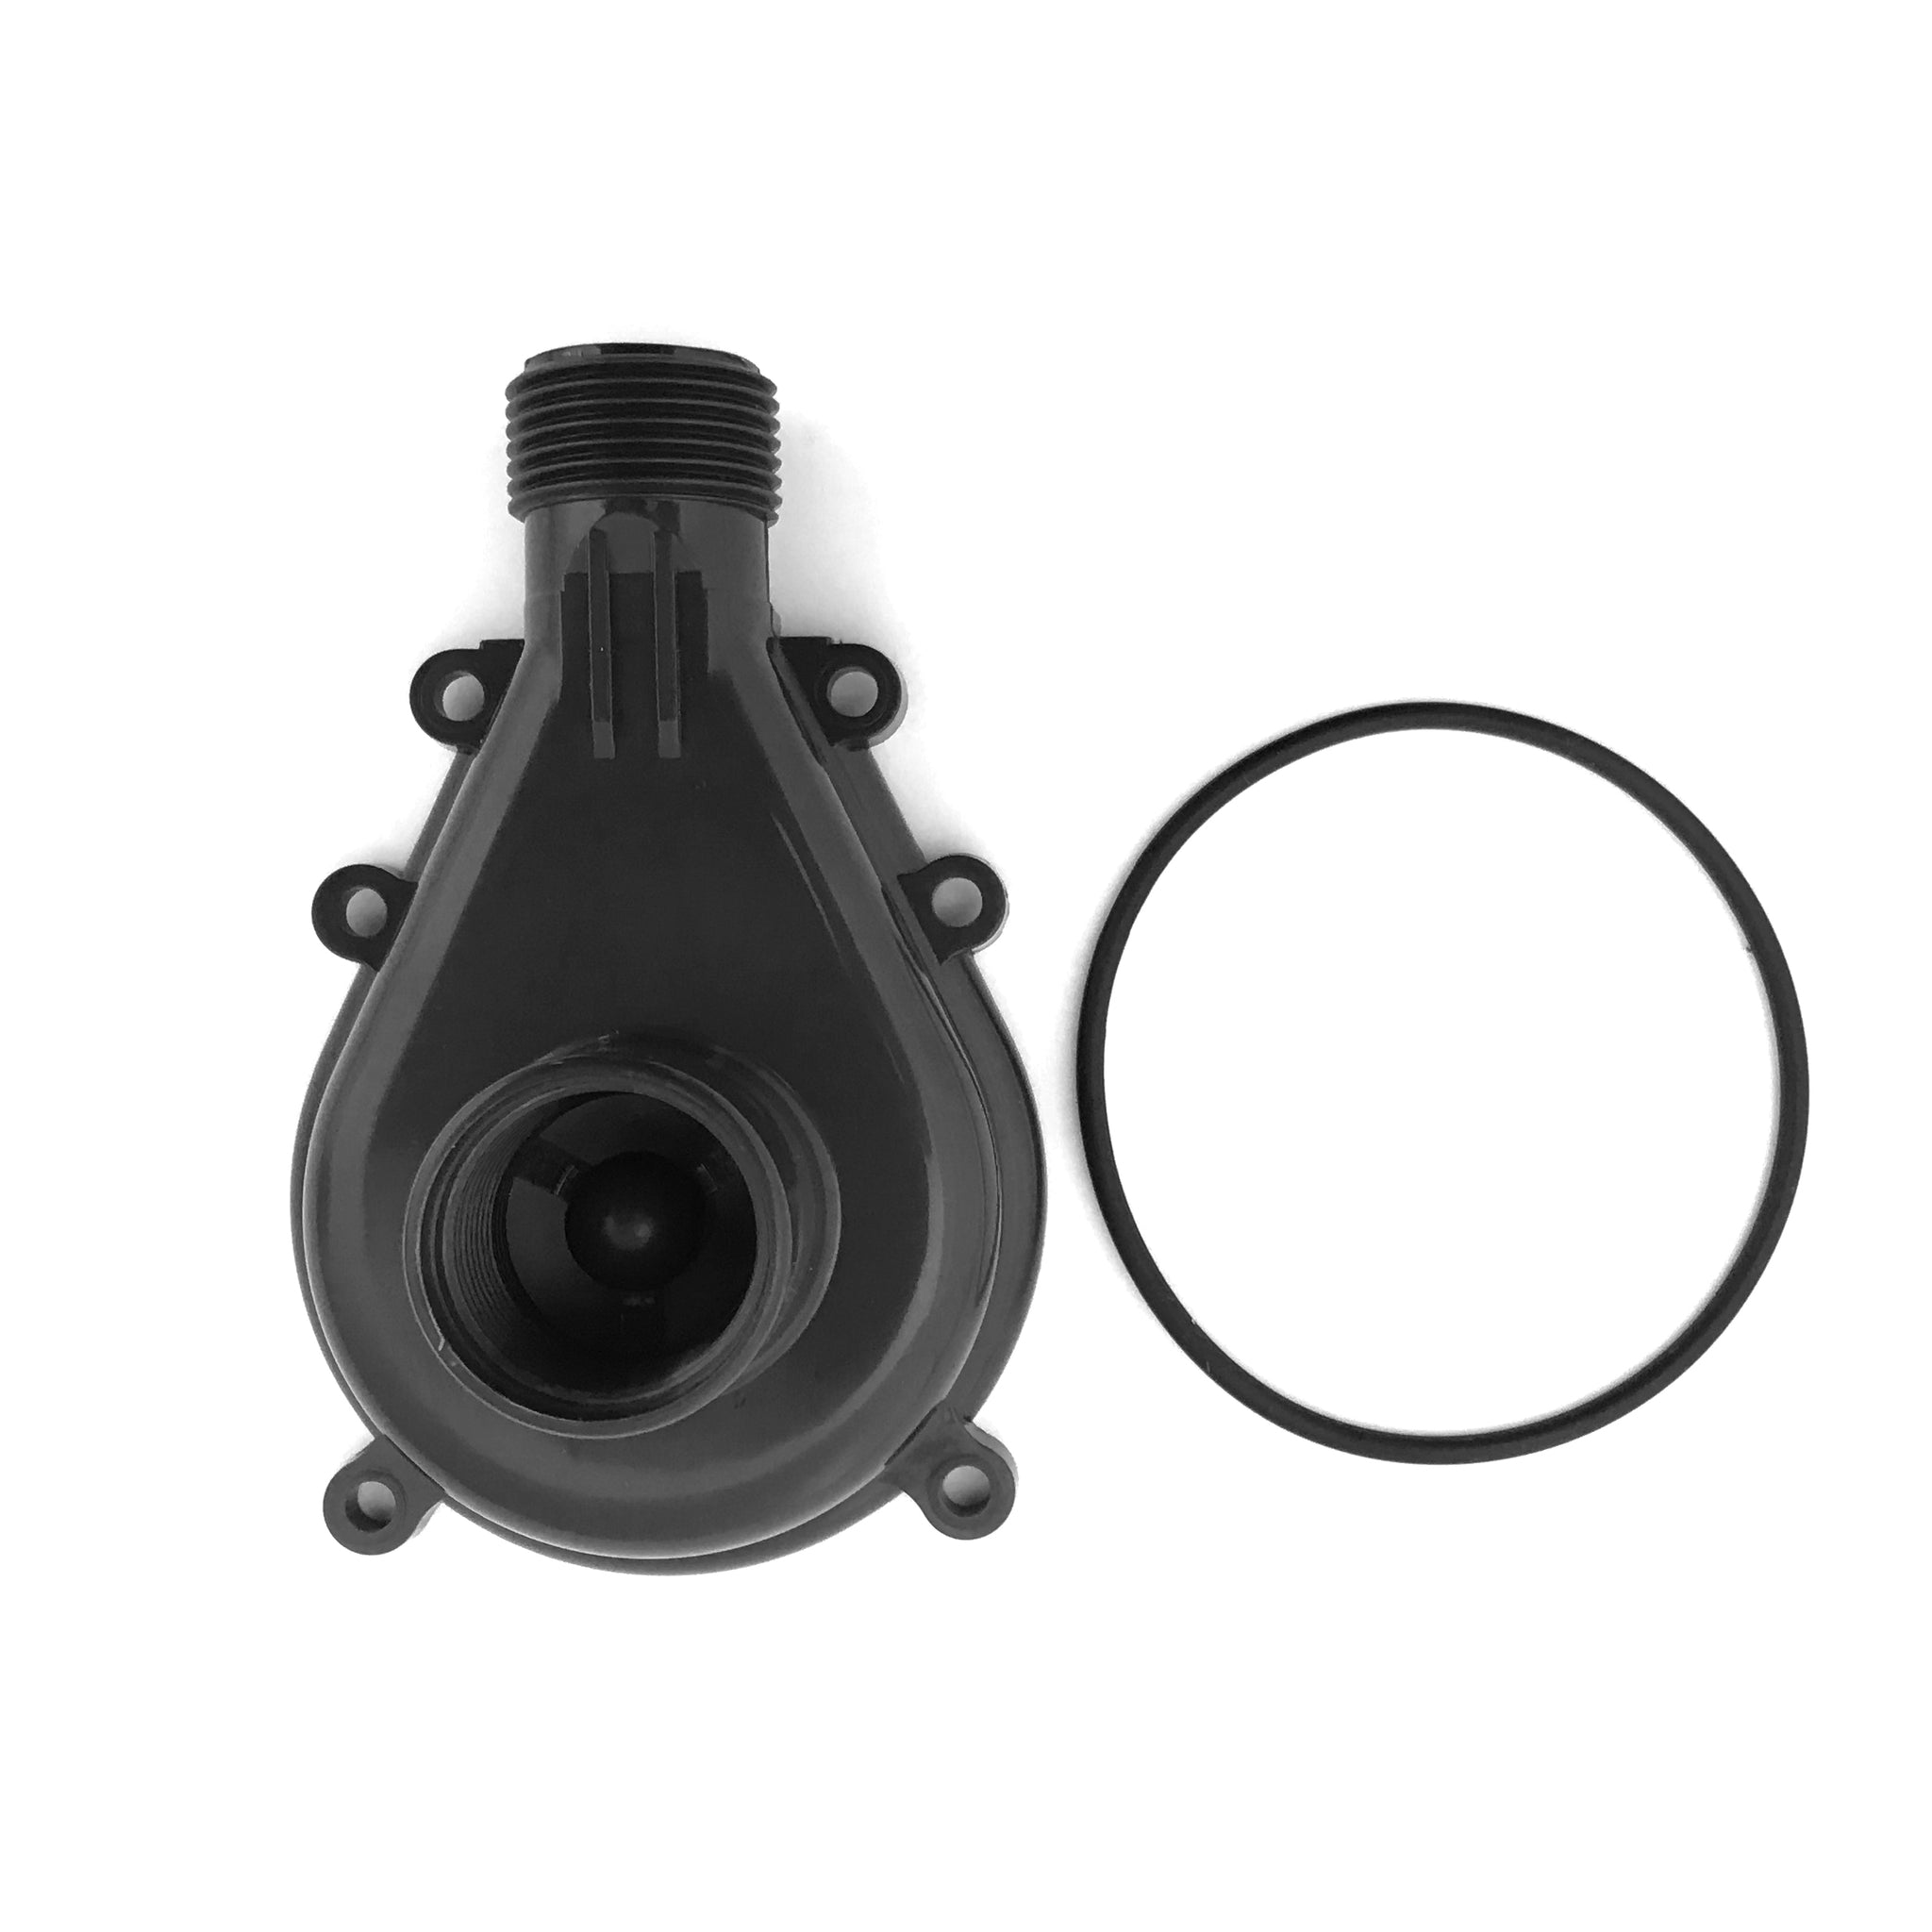 Replacement Pump Cover/Volute for Model 12B and 18